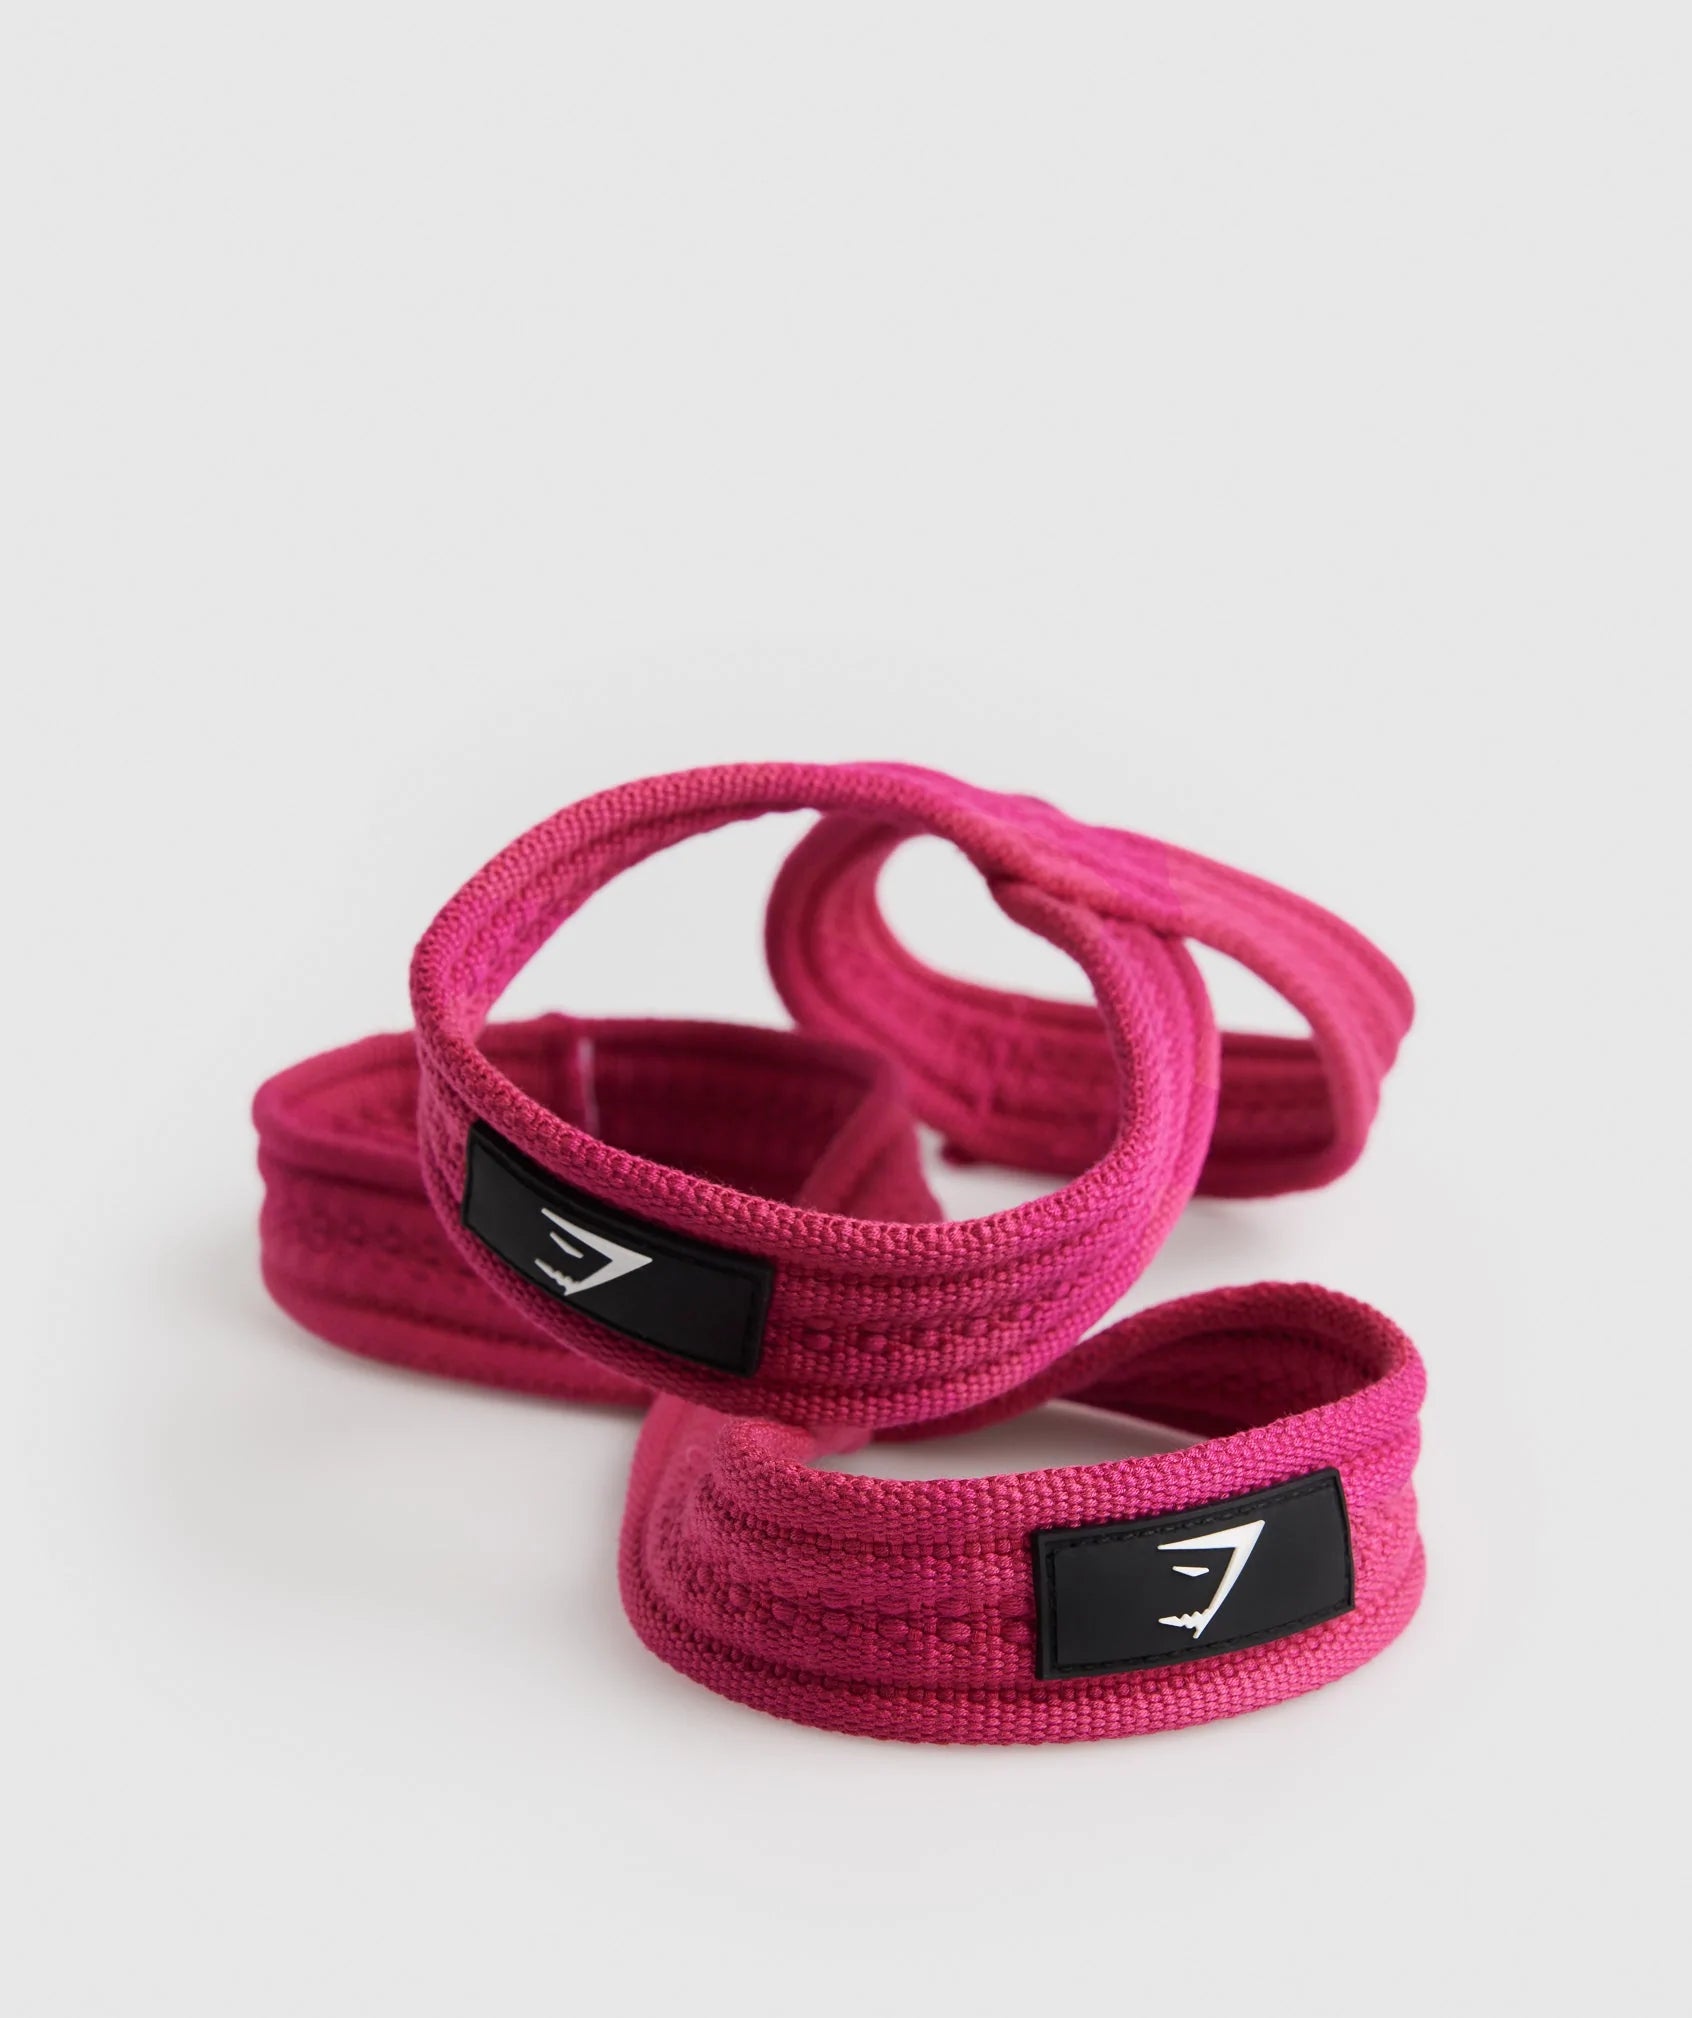 Gymshark Lifting Straps Review